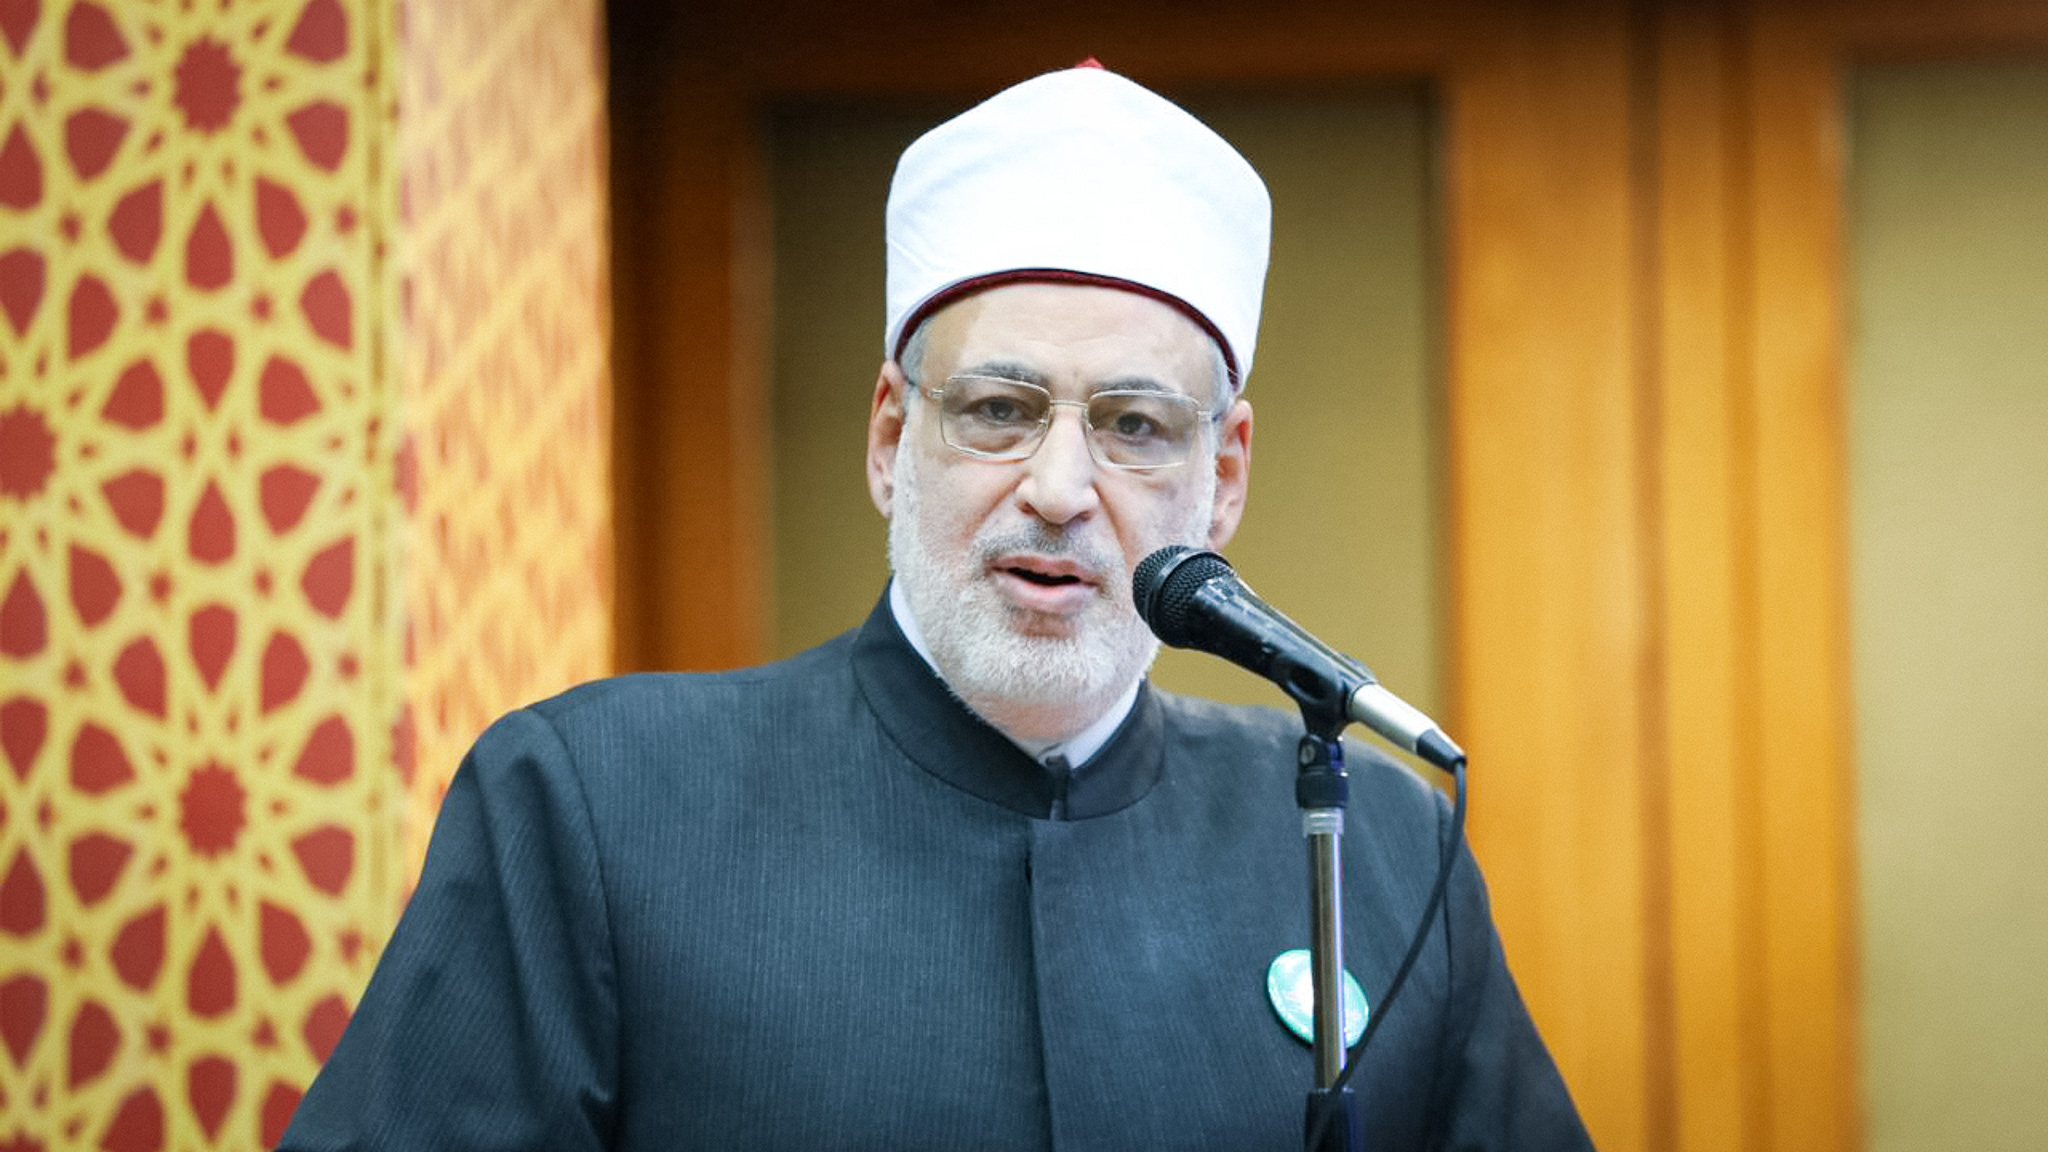 Vice Grand Sheikh of Al-Azhar Prof. Dr. Muhammad adh-Dhuwaini's Upcoming Public Lecture at UIII